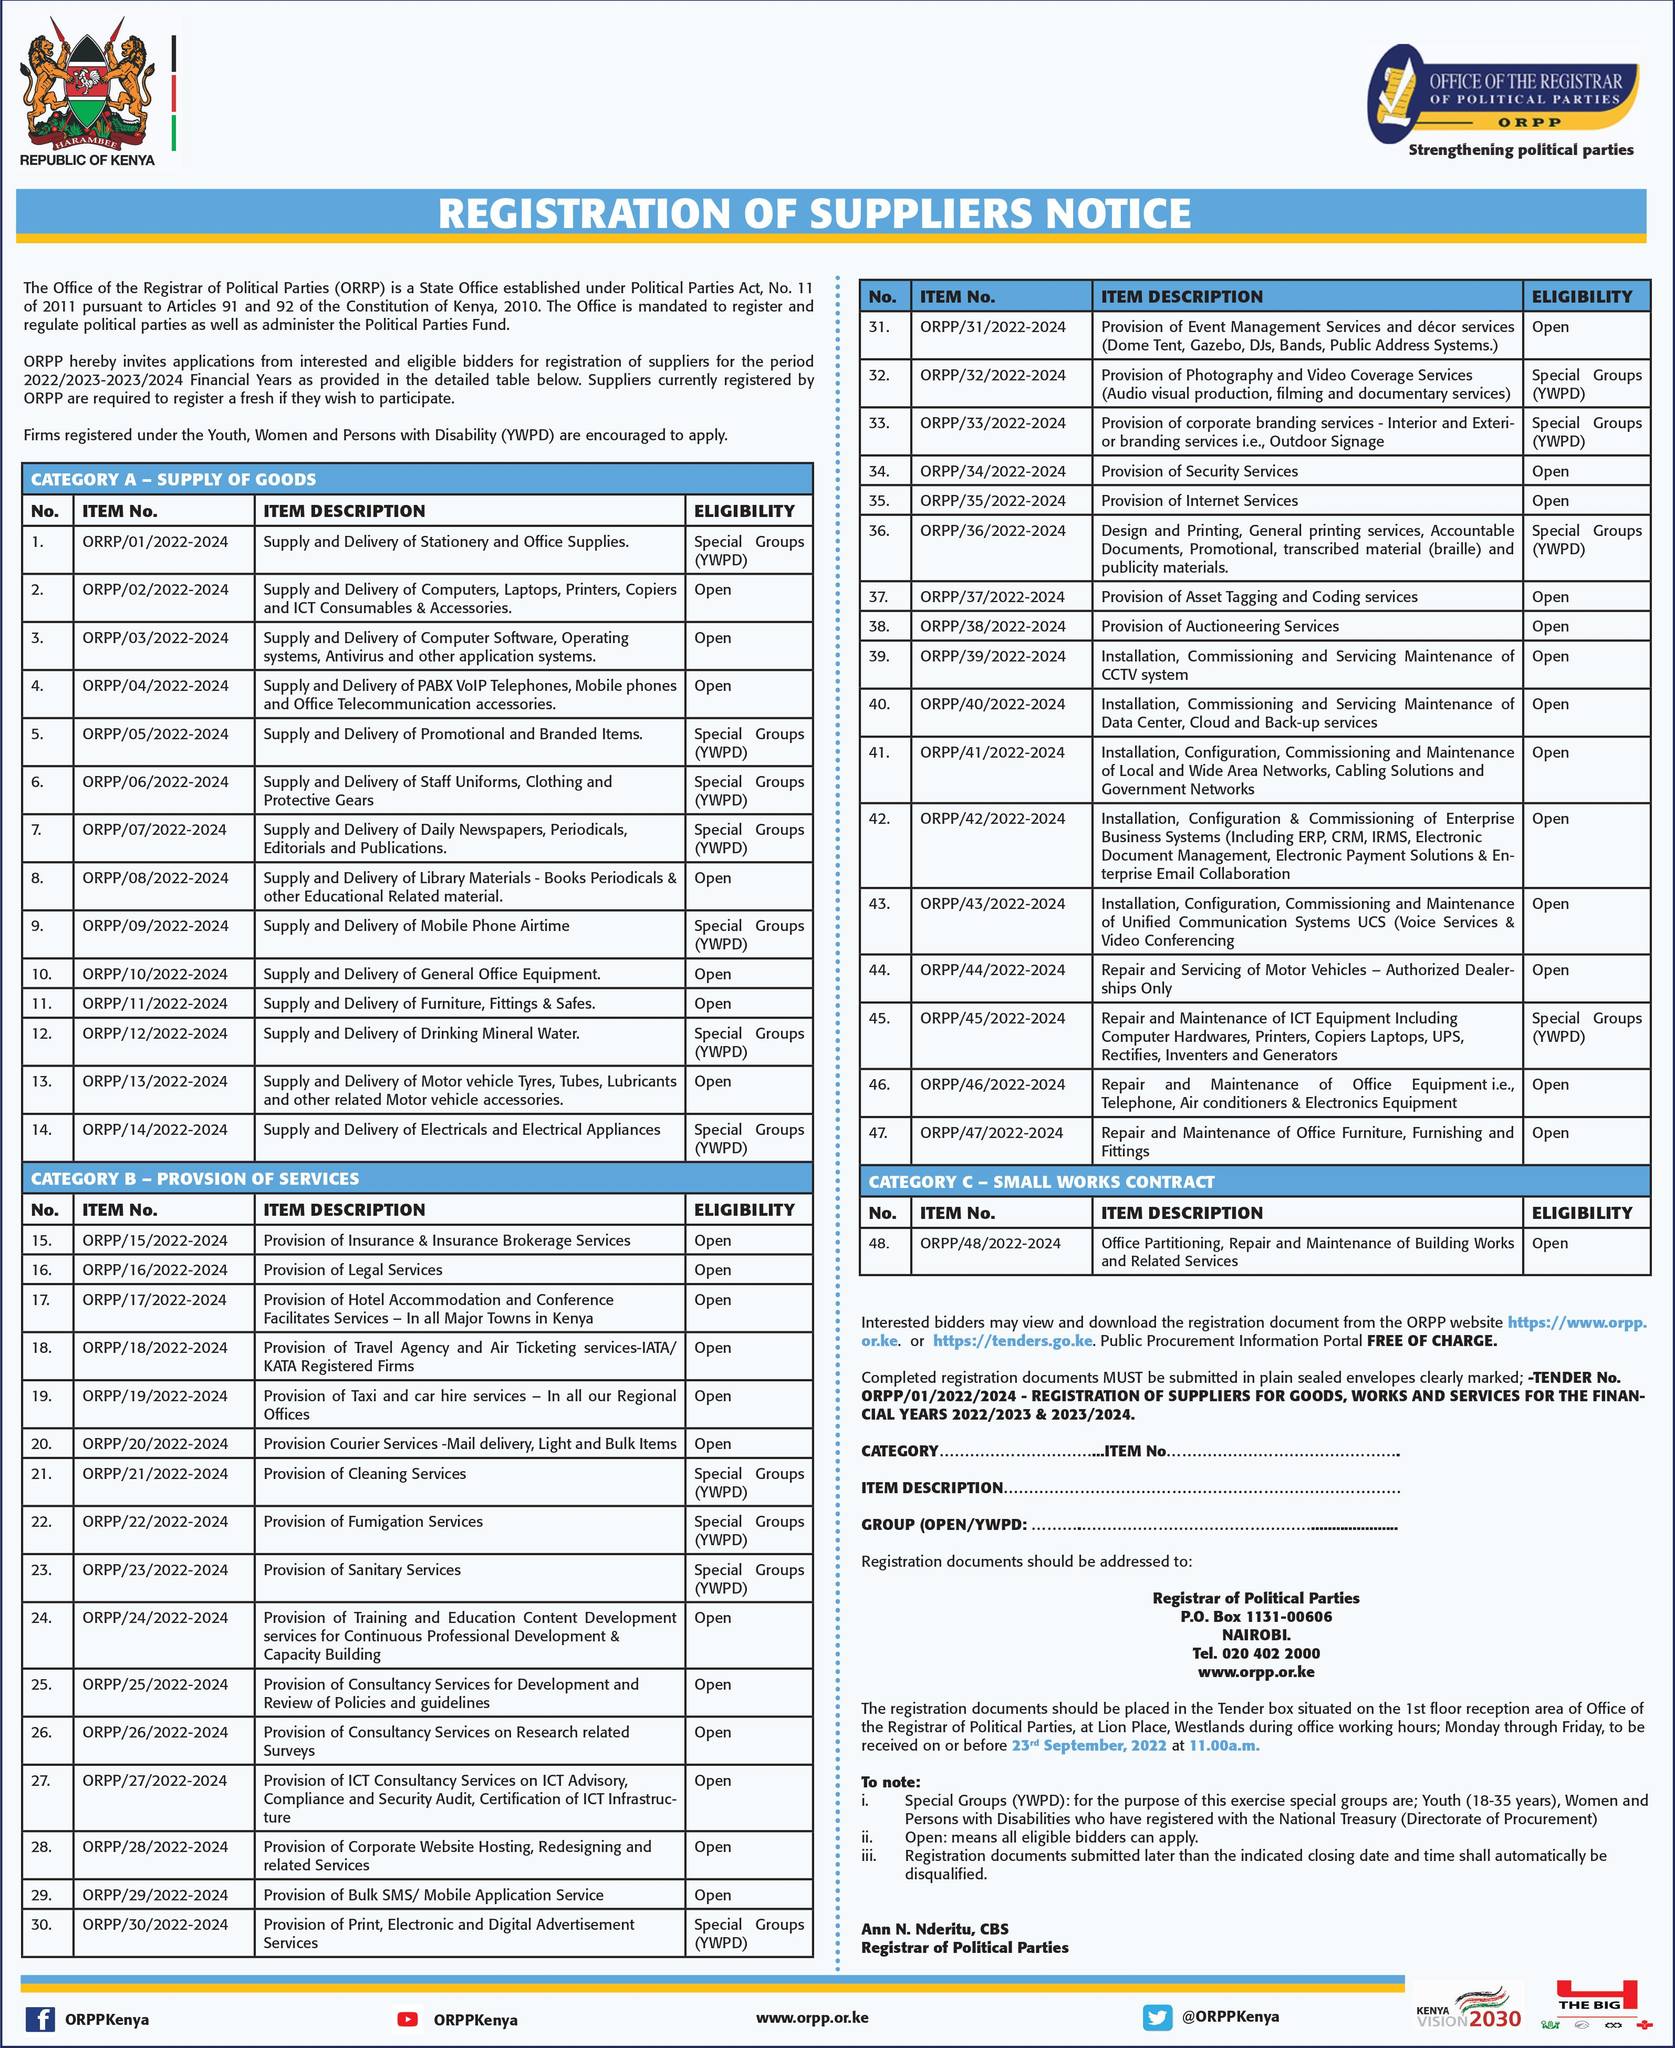 interested eligible bidders/vendors (including current suppliers) for supply of the under listed goods, works and services “as and when required basis” for the financial years 2022-2024